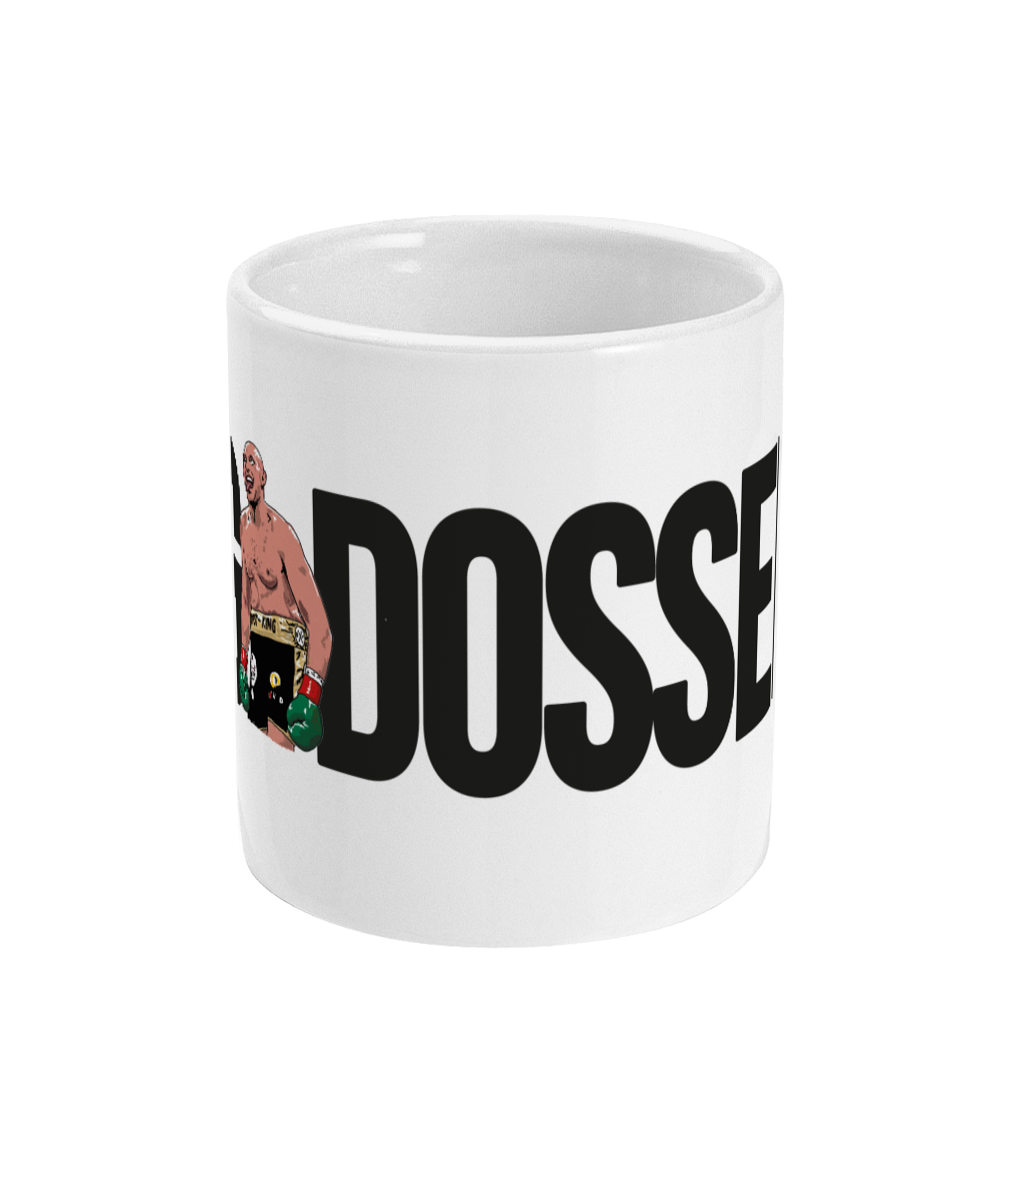 Big Dosser mug by A Town Called Home, featuring Tyson Fury